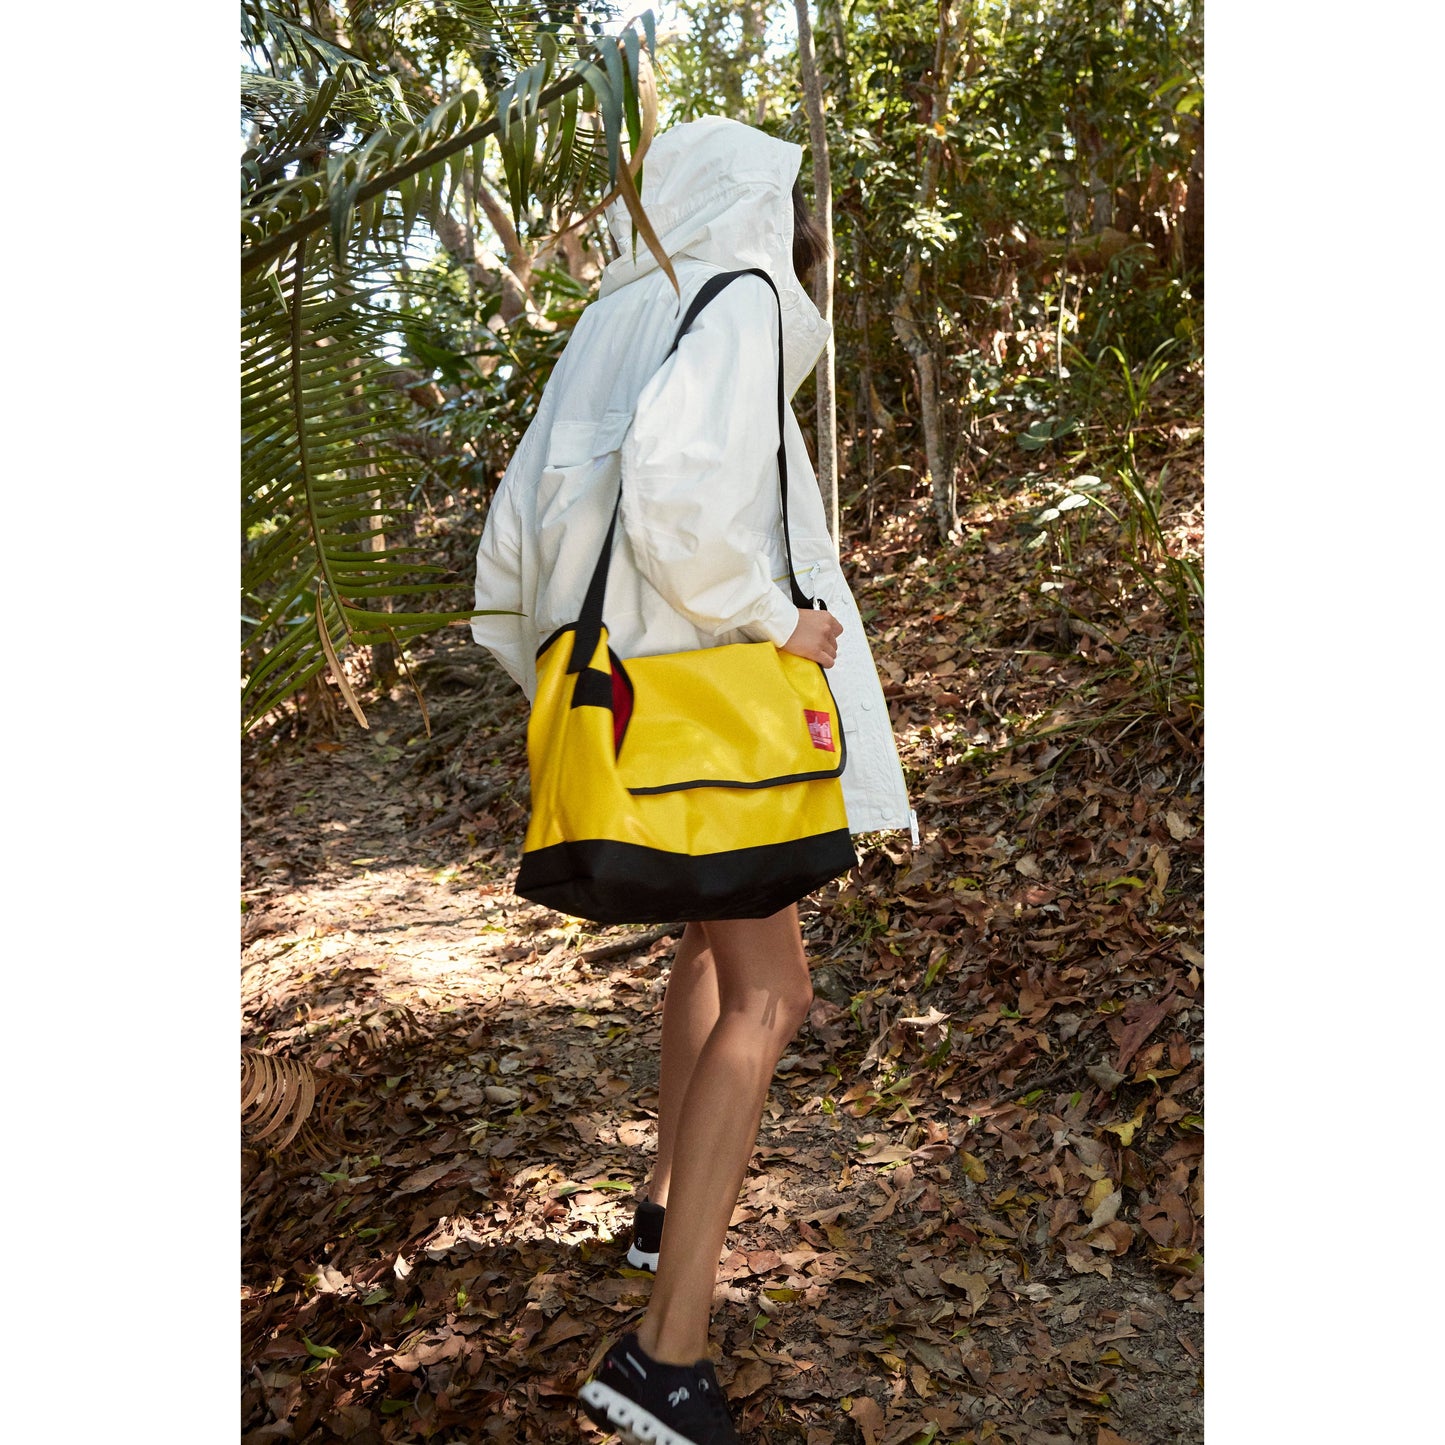 A person in a Singin in the Rain Jacket, Painted White hooded rain jacket and shorts carrying a bright yellow bag walks on a forest path.